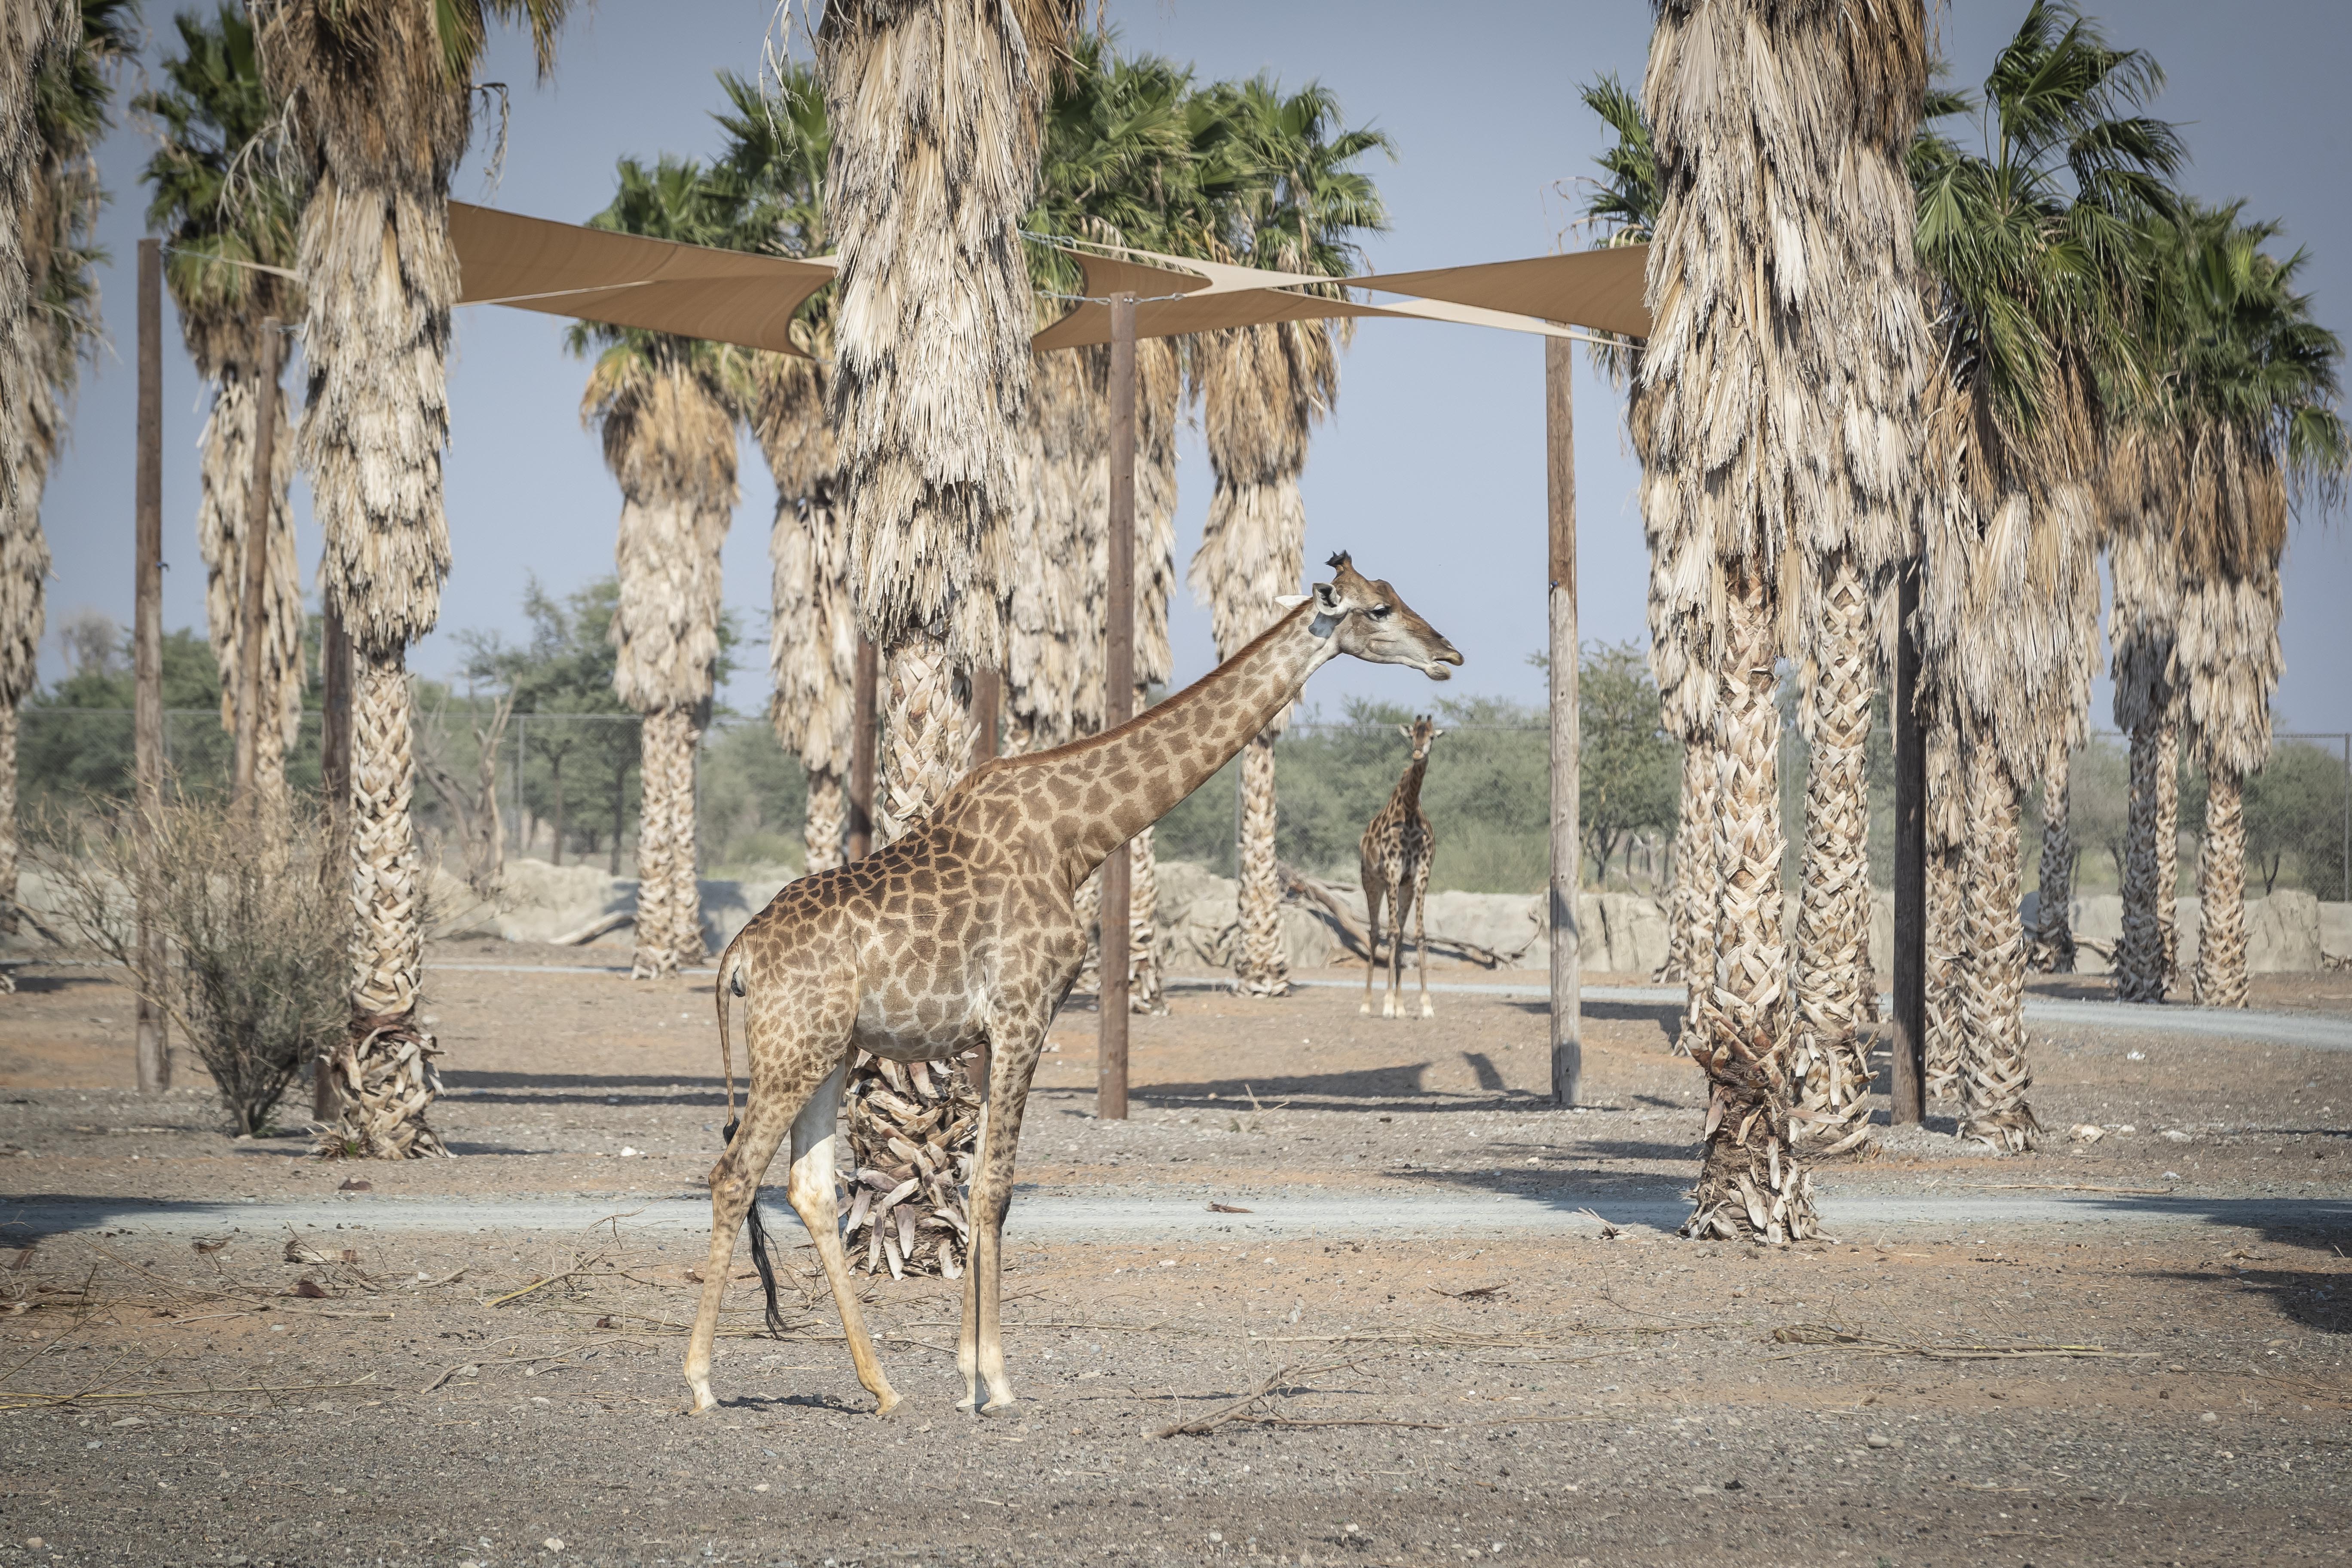 Sharjah Safari park opens its gates after seven years in making